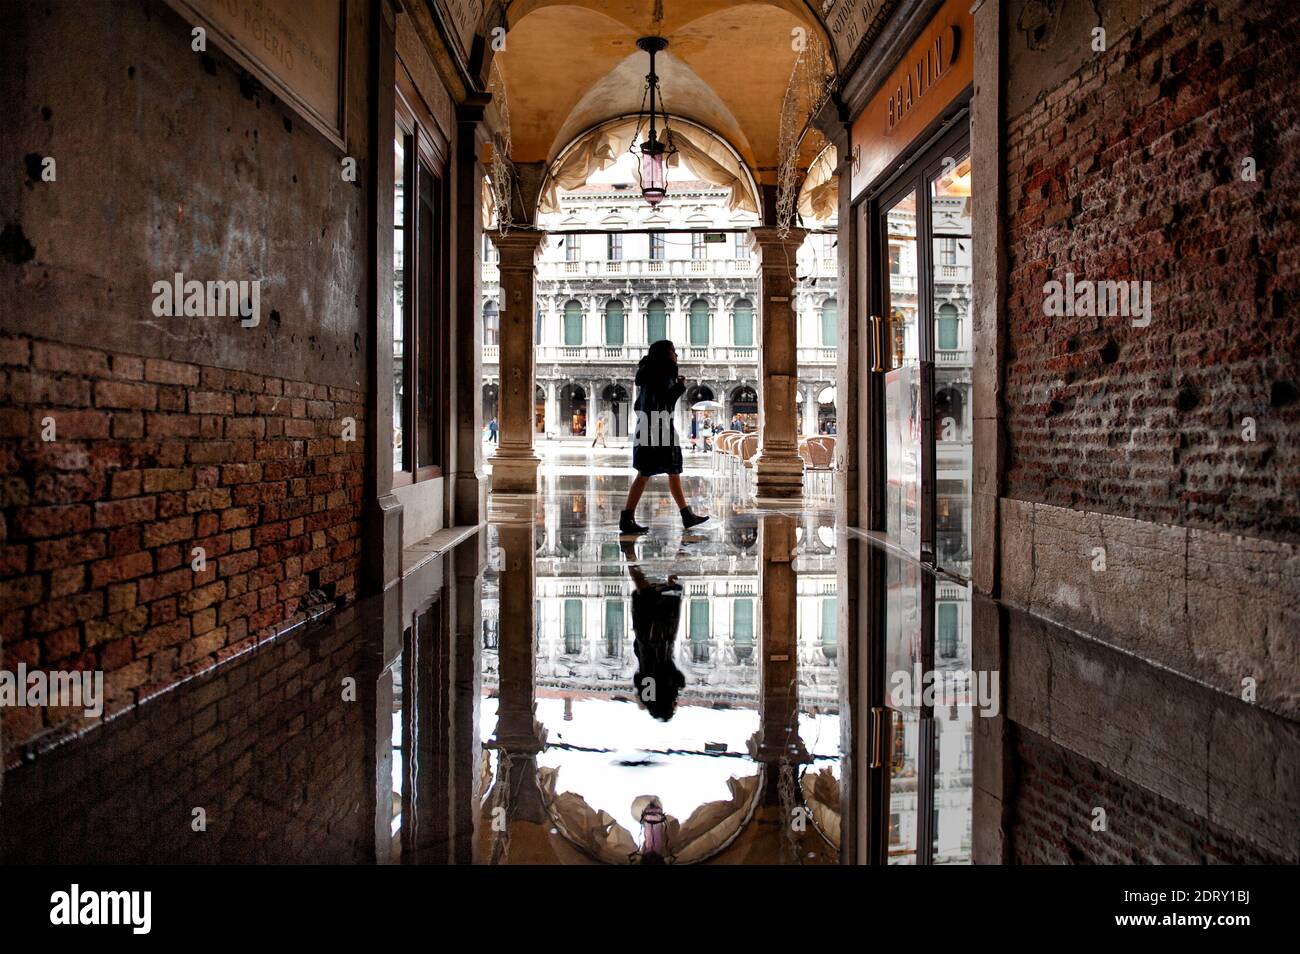 St. Mark's Square flooded by high tide. Venice, Italy Stock Photo